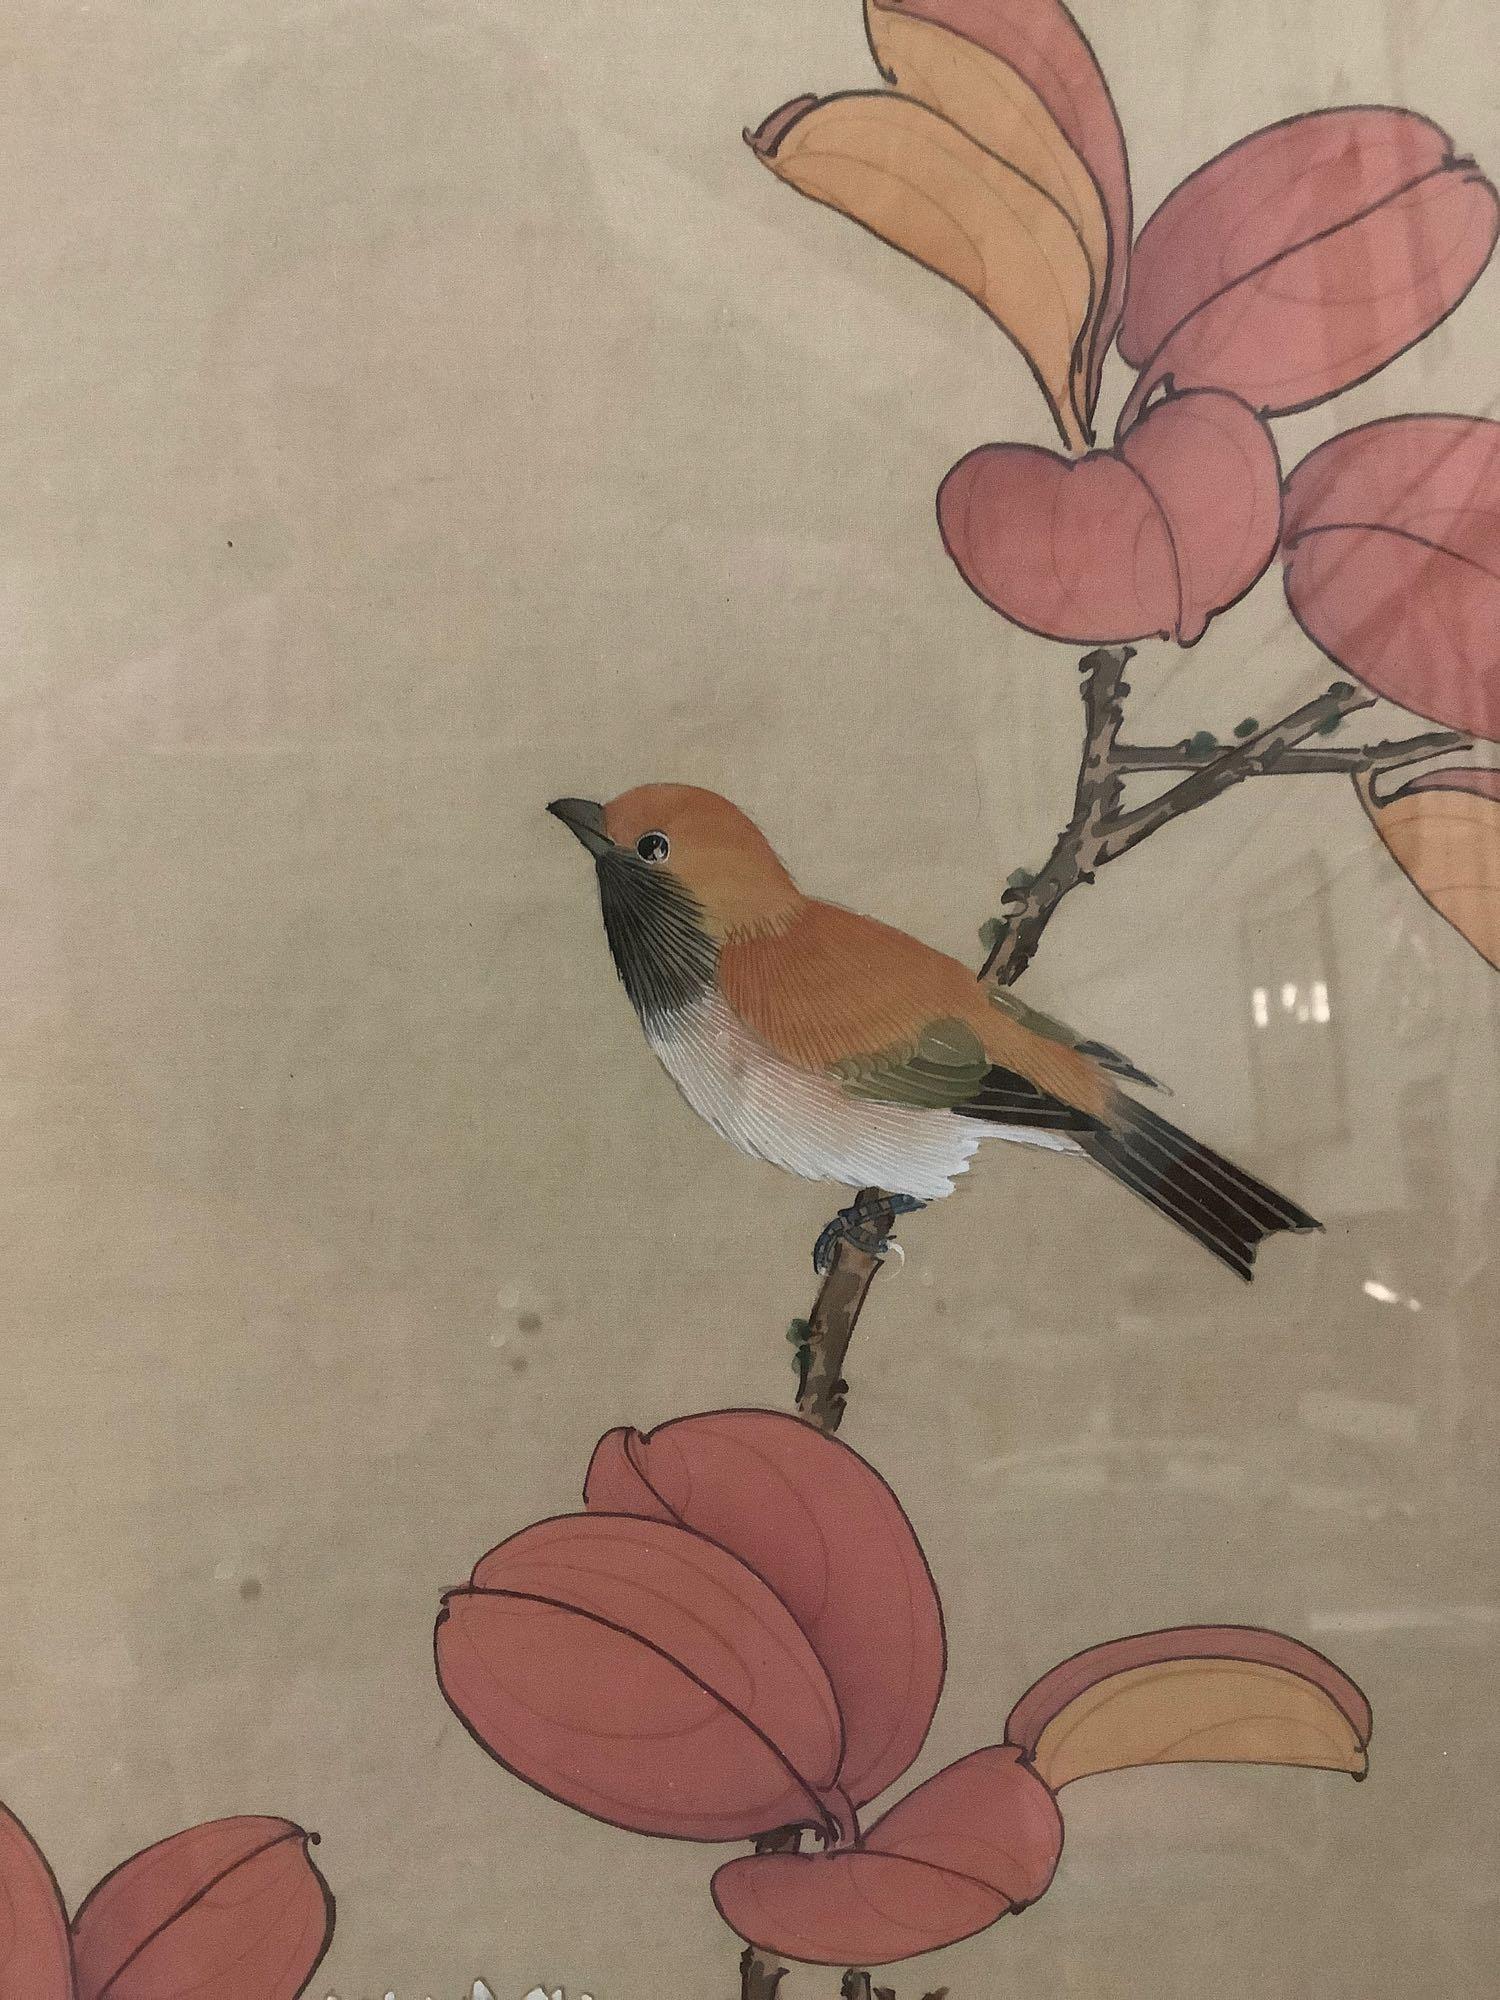 Pair of framed Asian bird artworks, signed by artist, see pics